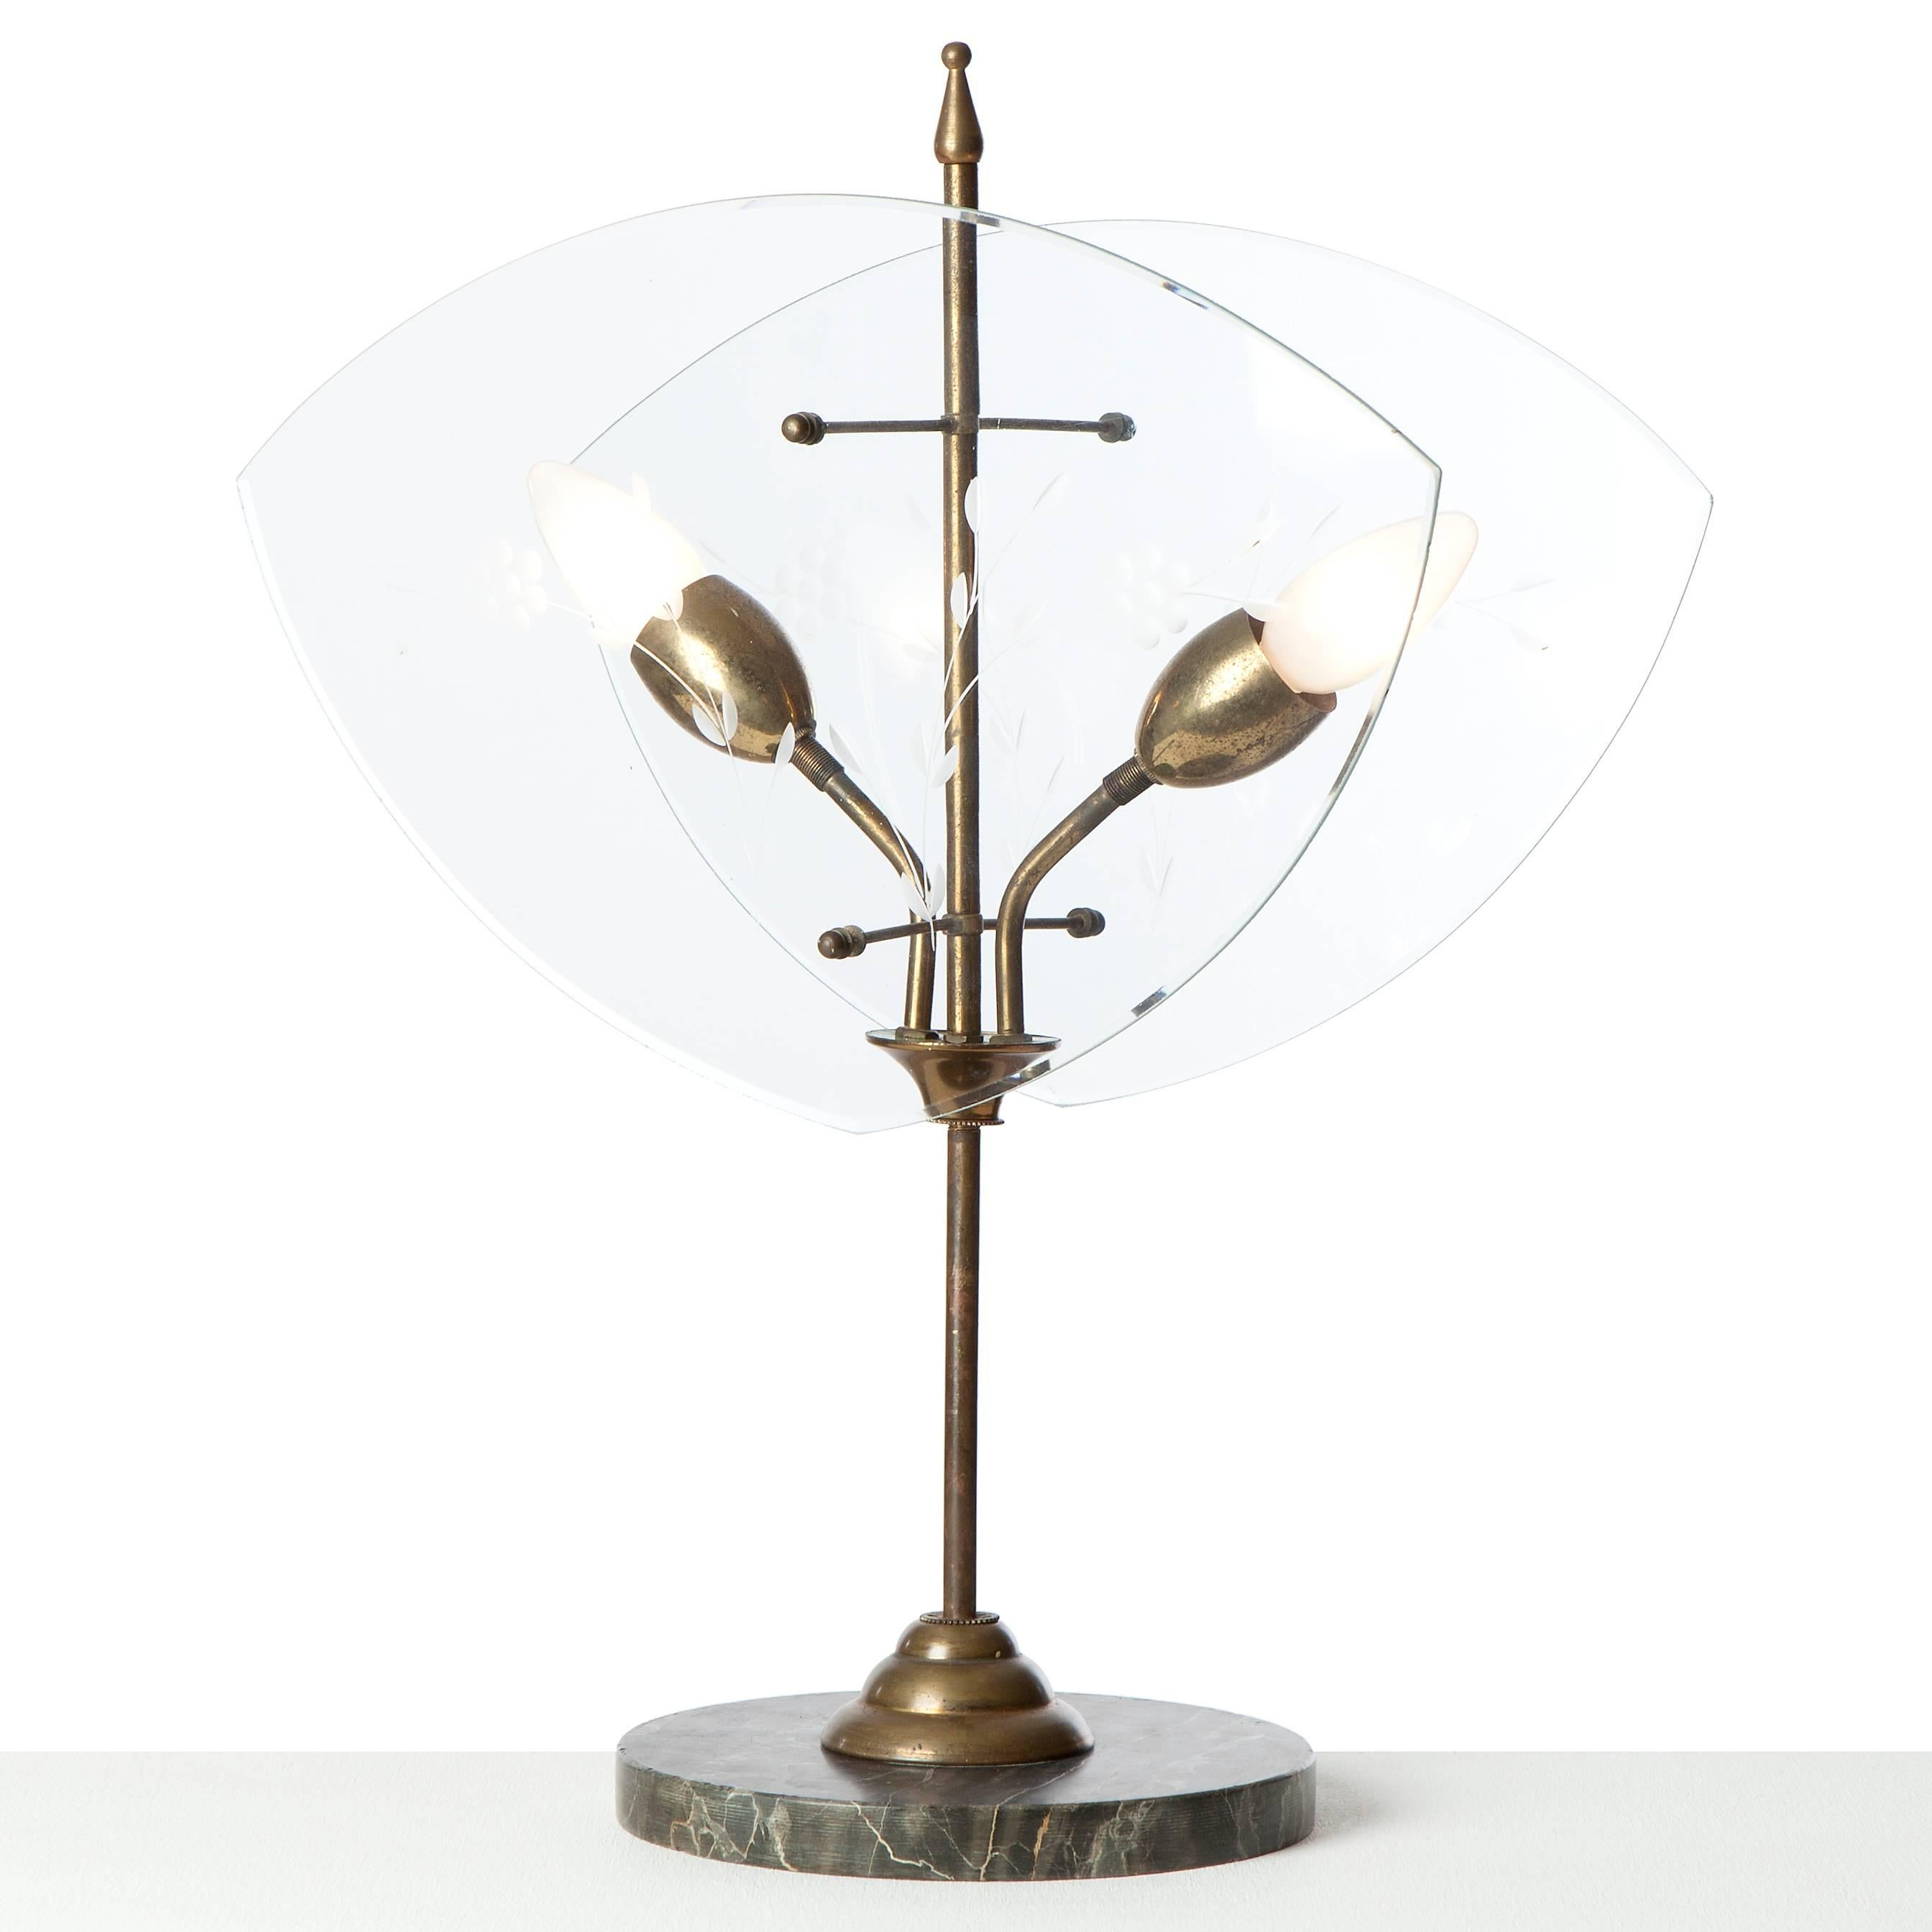 Early (attributed to) Fontana Arte two-light table lamp, with a brass stem. Flanked by two glass-plates etched with a floral motif. The lamp is in vintage condition, there is a small scratch to be found only to be seen from very close.